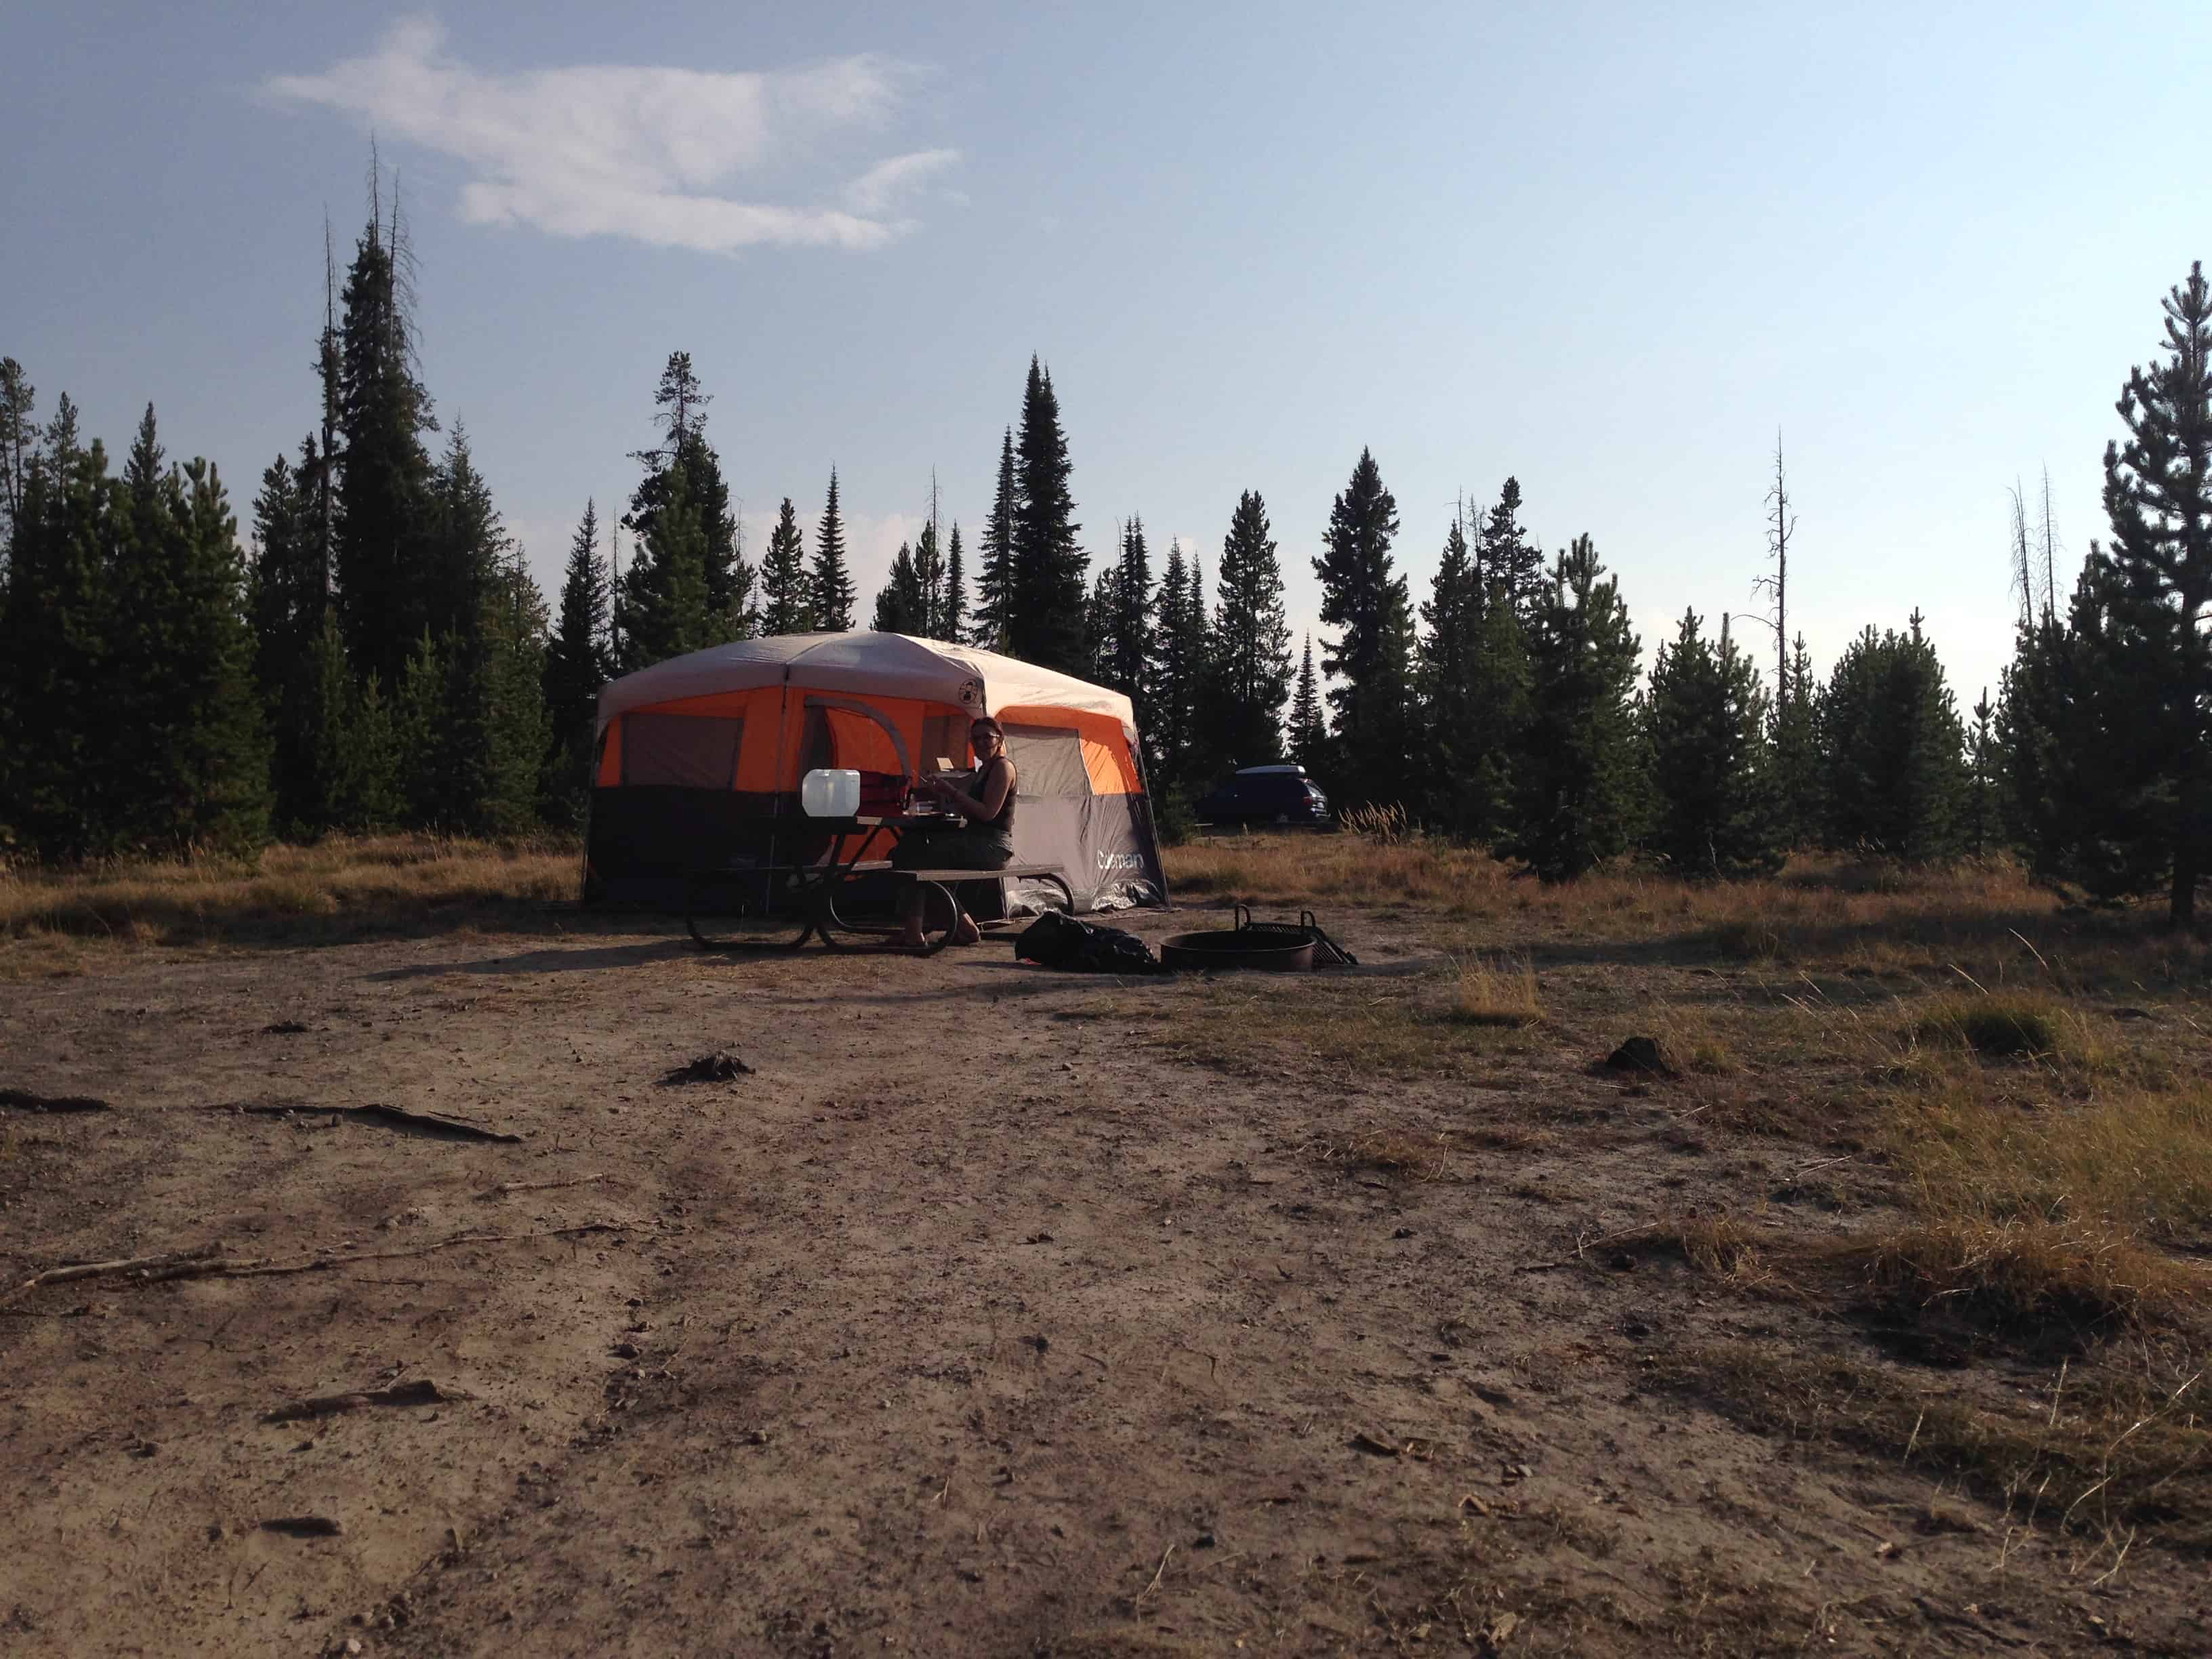 Grant Village Campground at Yellowstone National Park, Wyoming